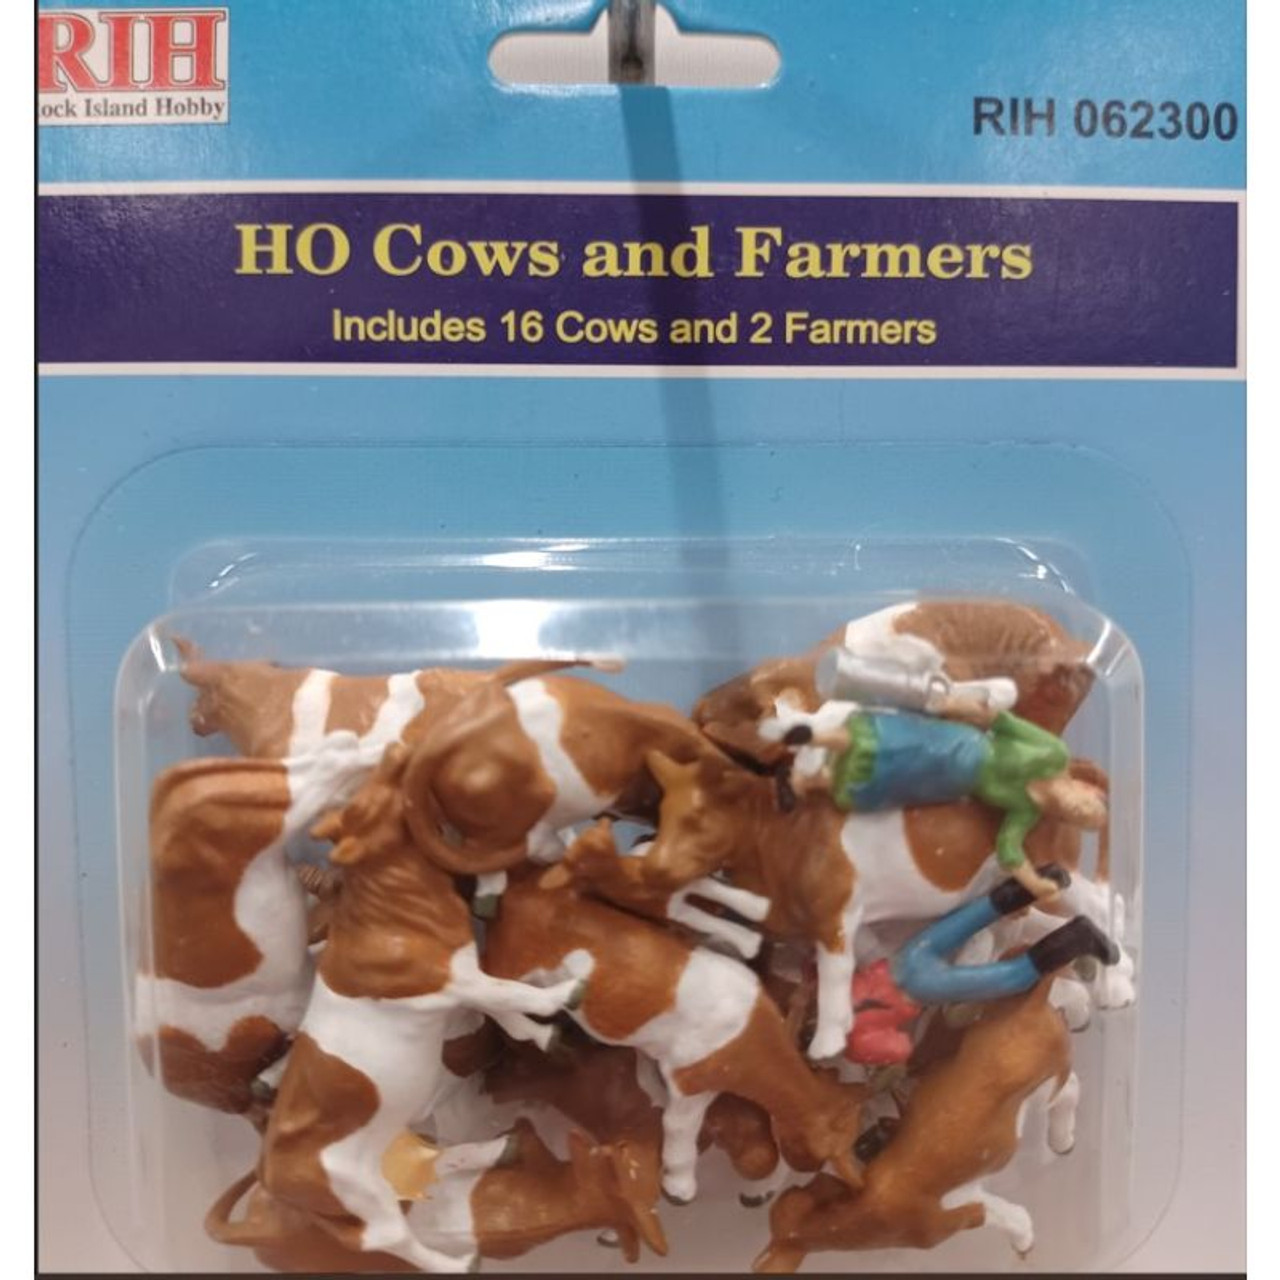 Rock Island Hobby 062300 - Cows and Farmers - Painted (16 cows, 2 farmers)  - HO Scale - Midwest Model Railroad